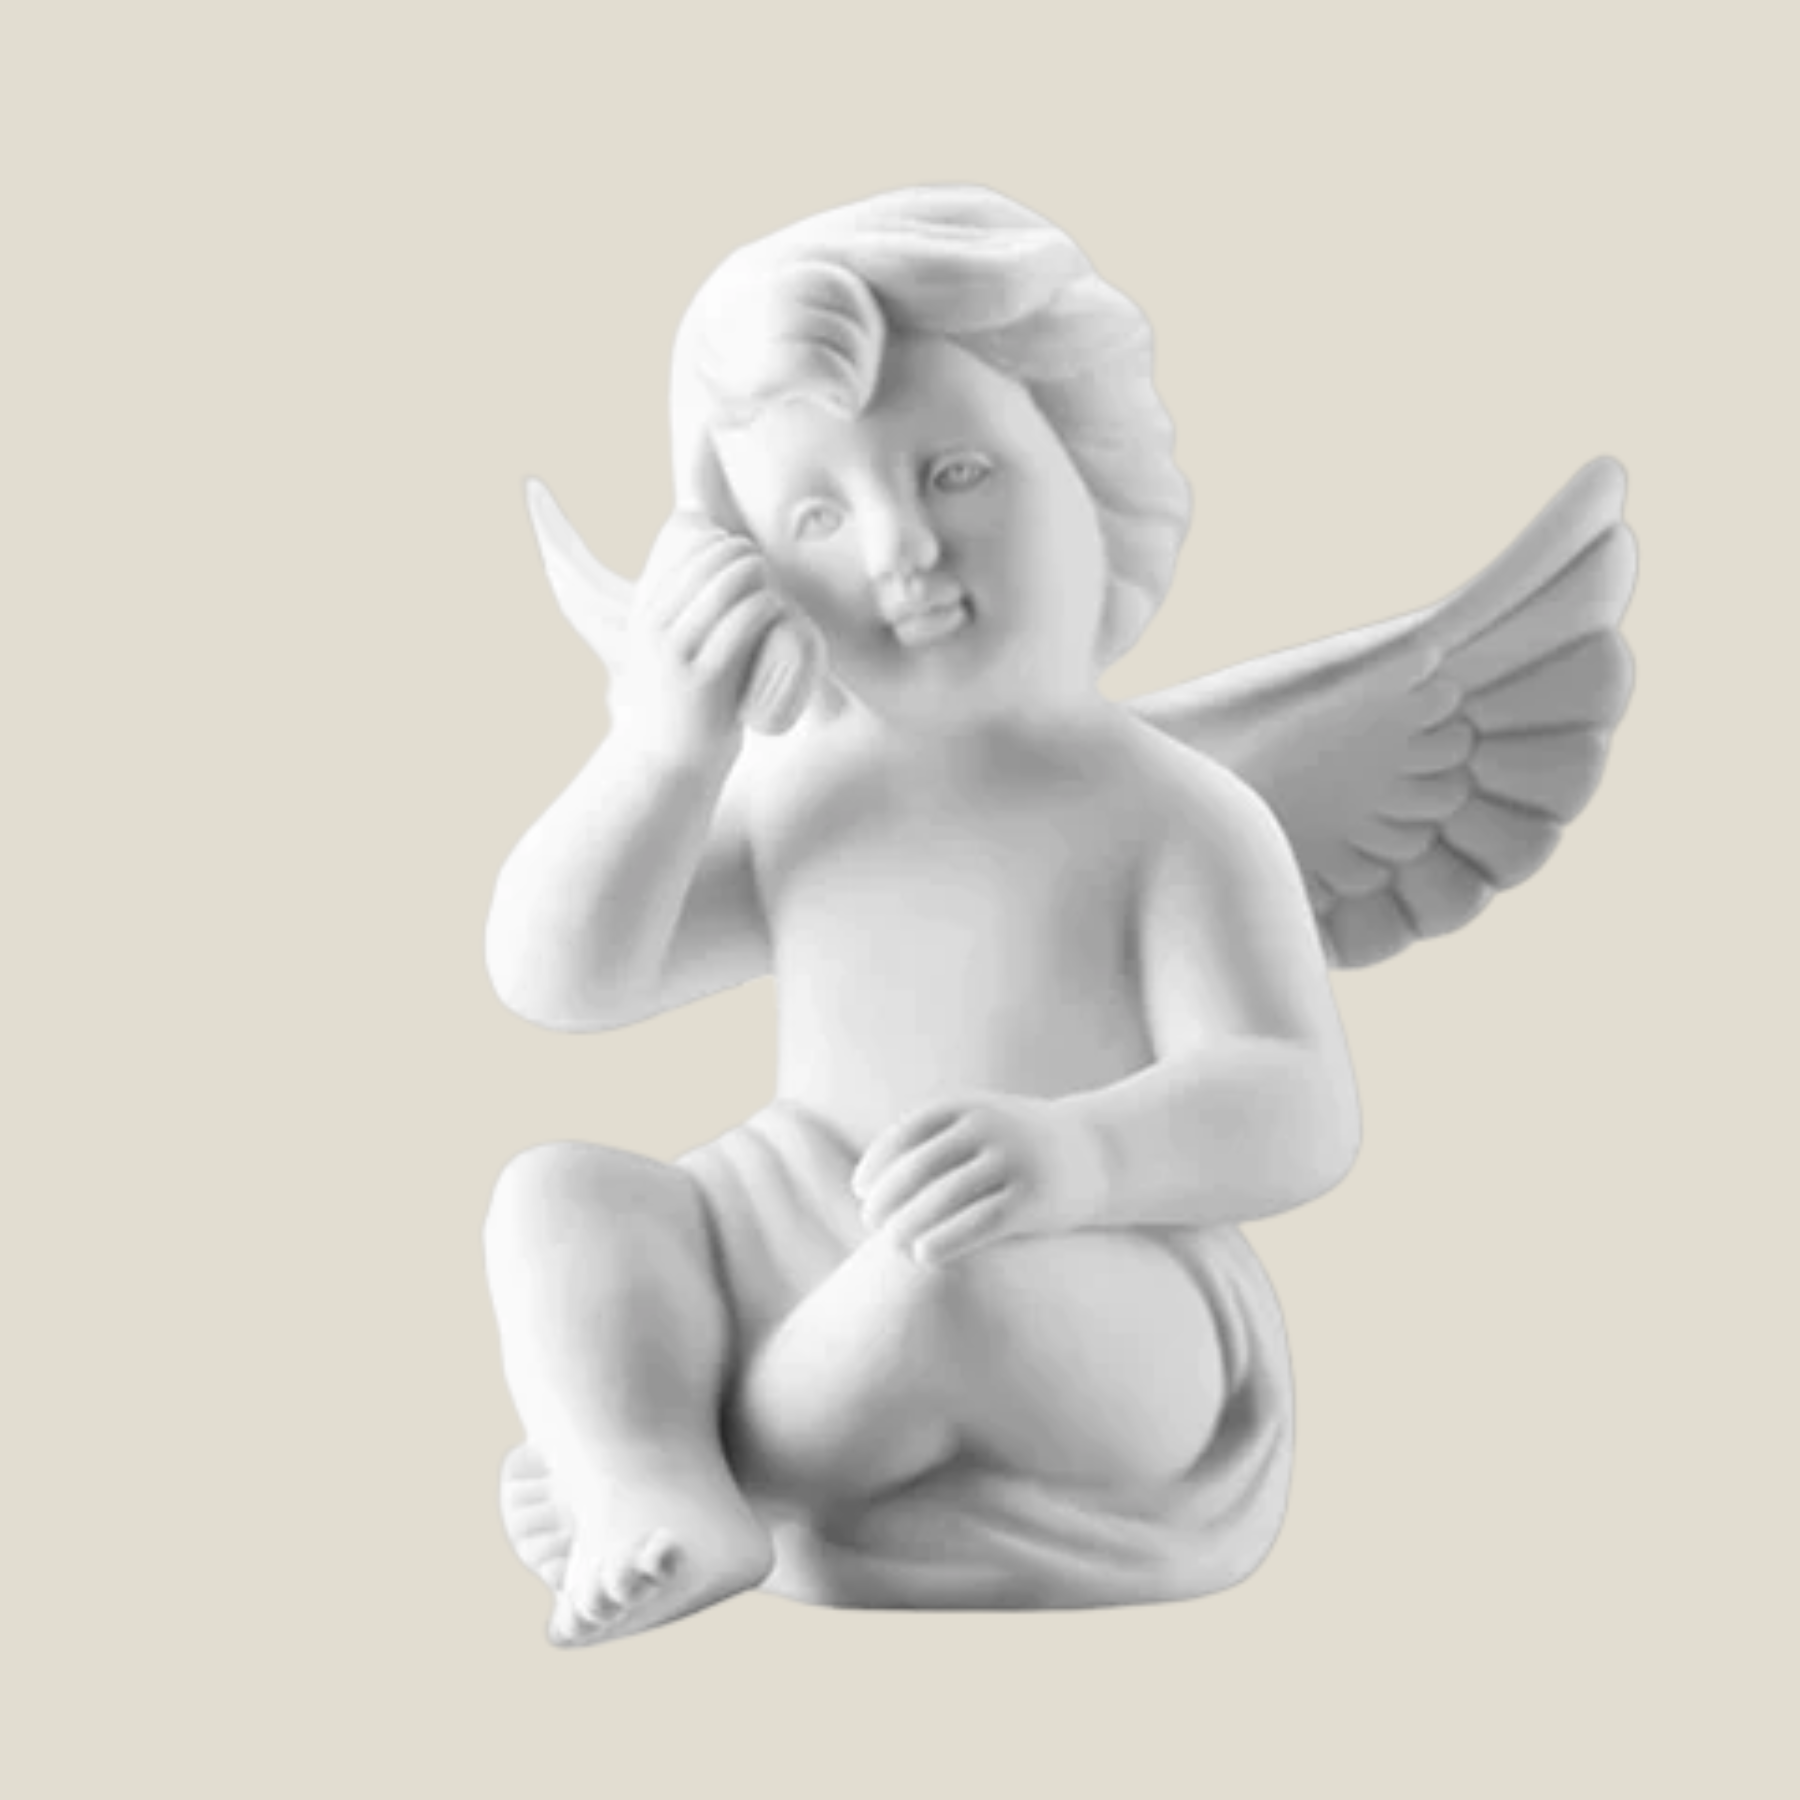 Angel with smartphone - Large